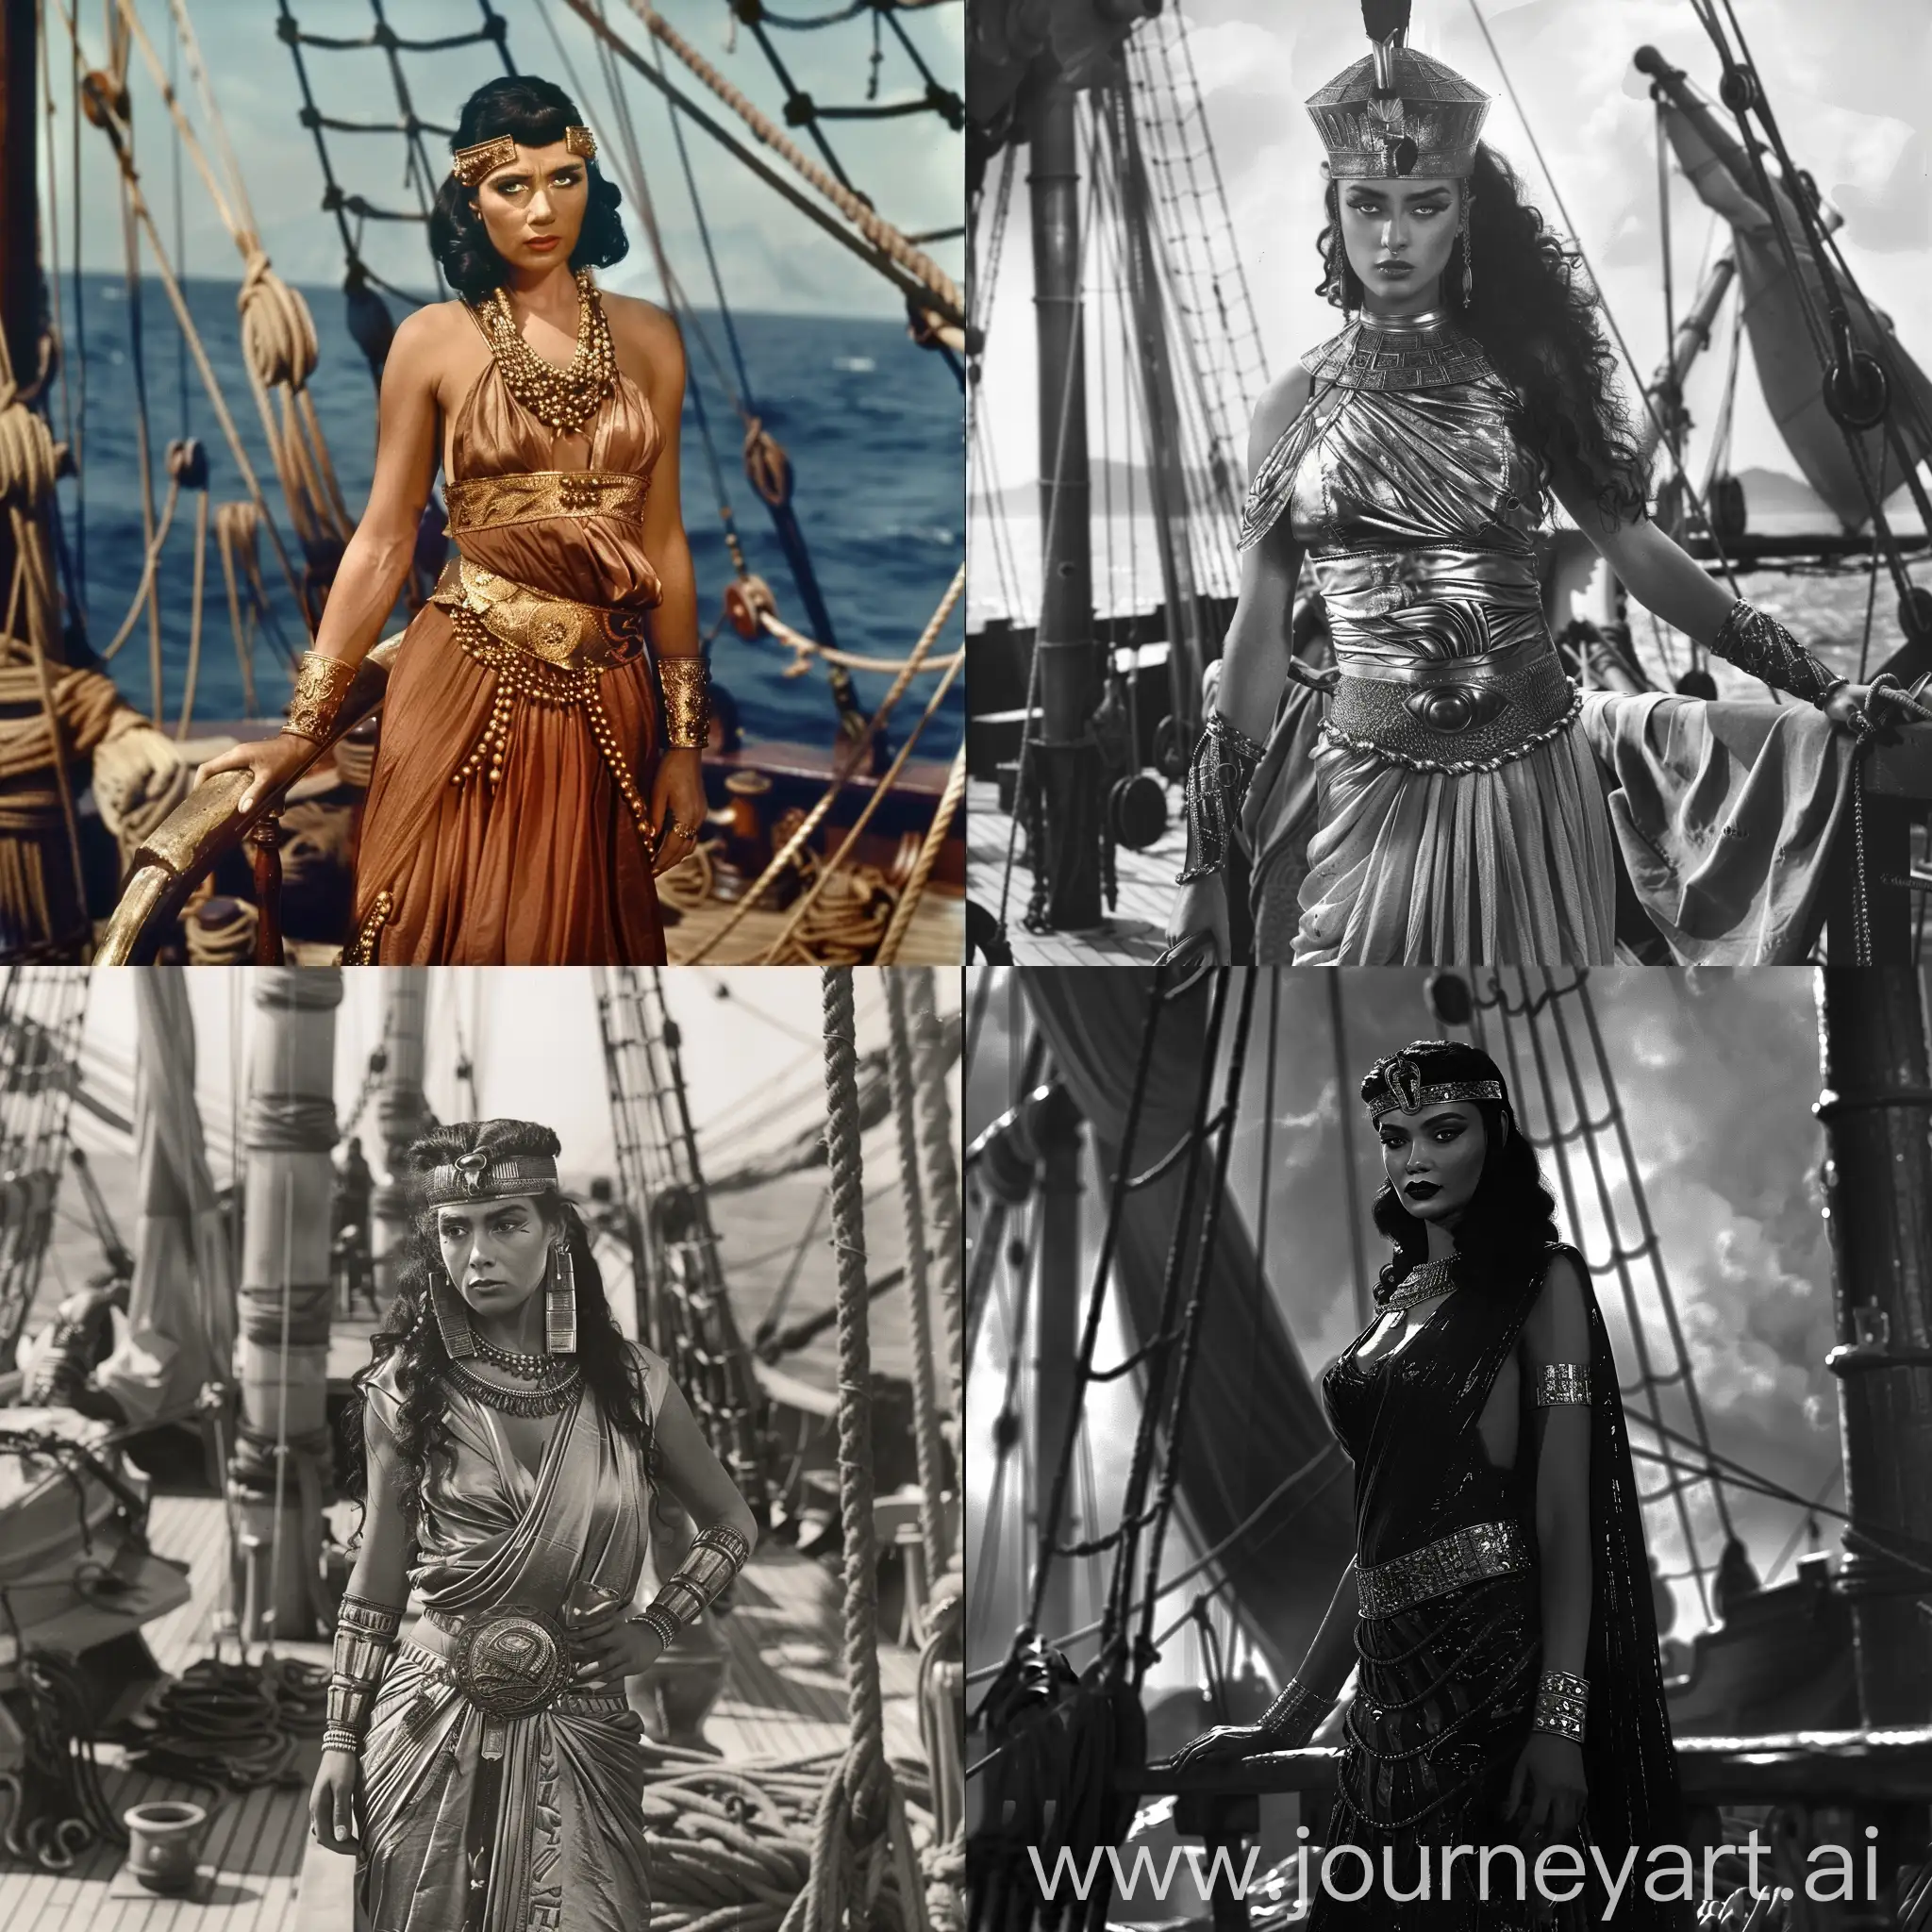 Cleopatra standing on a ship's deck, looking fierce